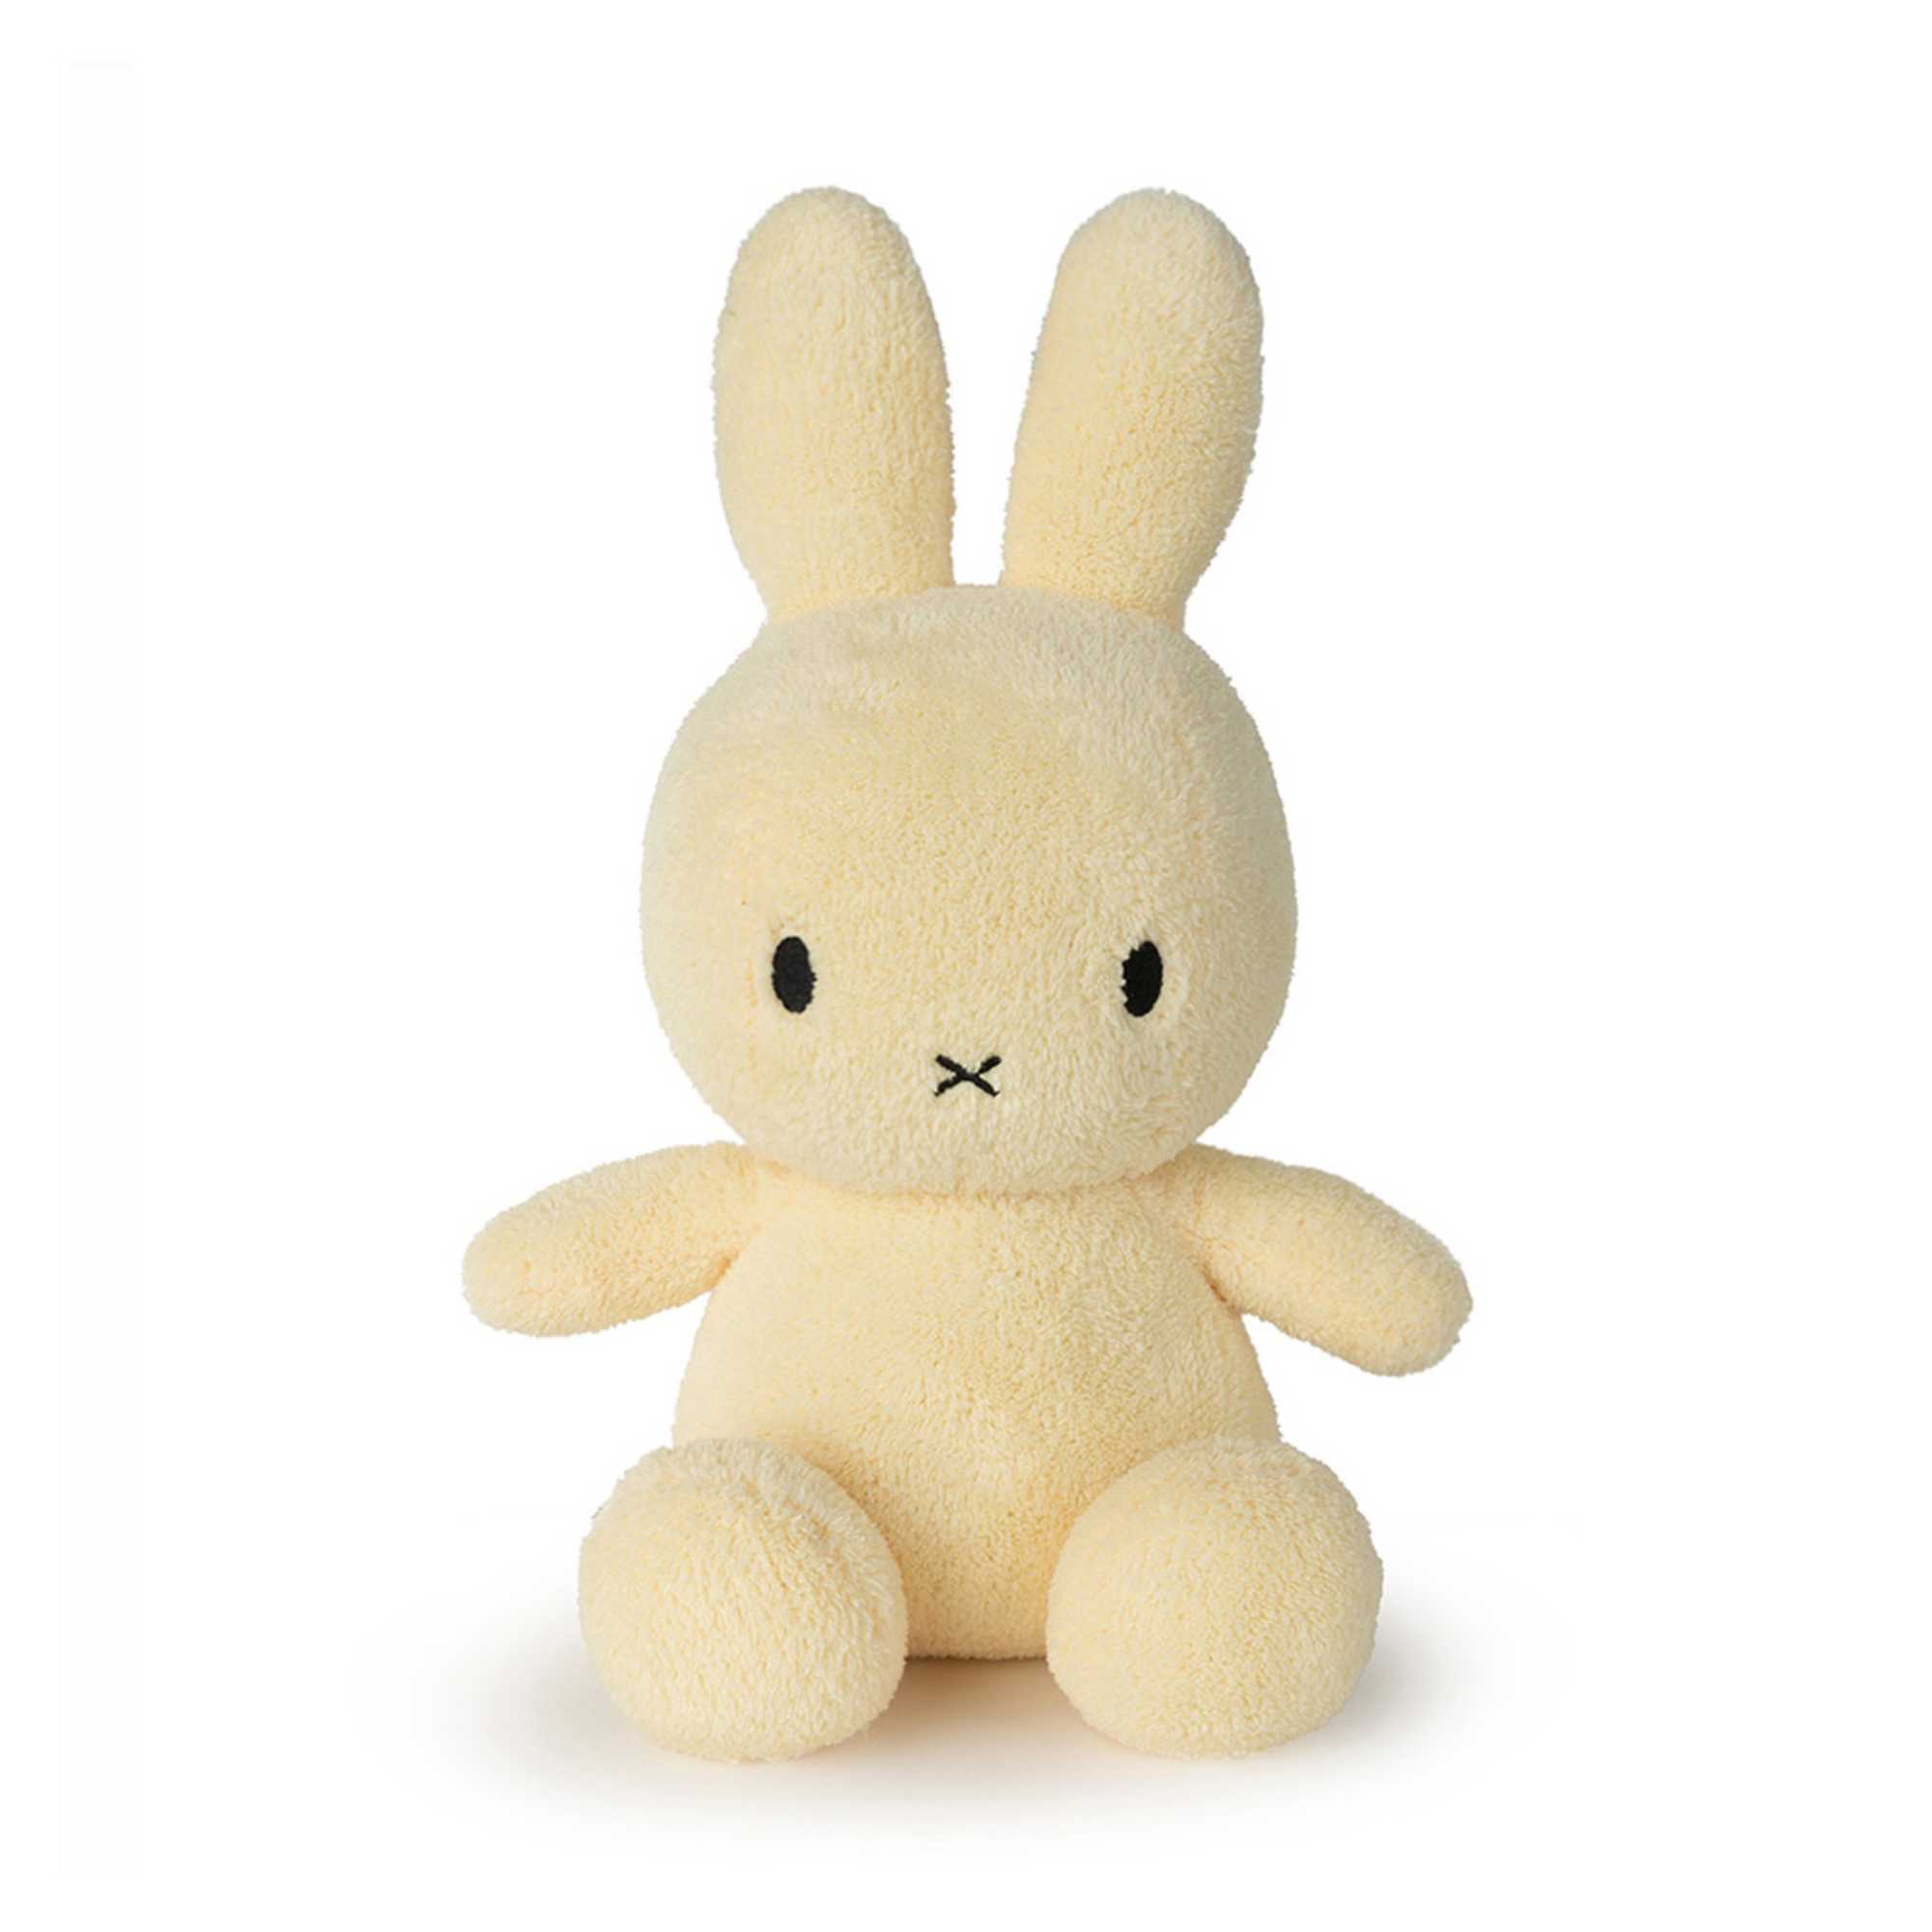 Miffy Sitting Terry Soft Toy, Light Yellow (33cm)